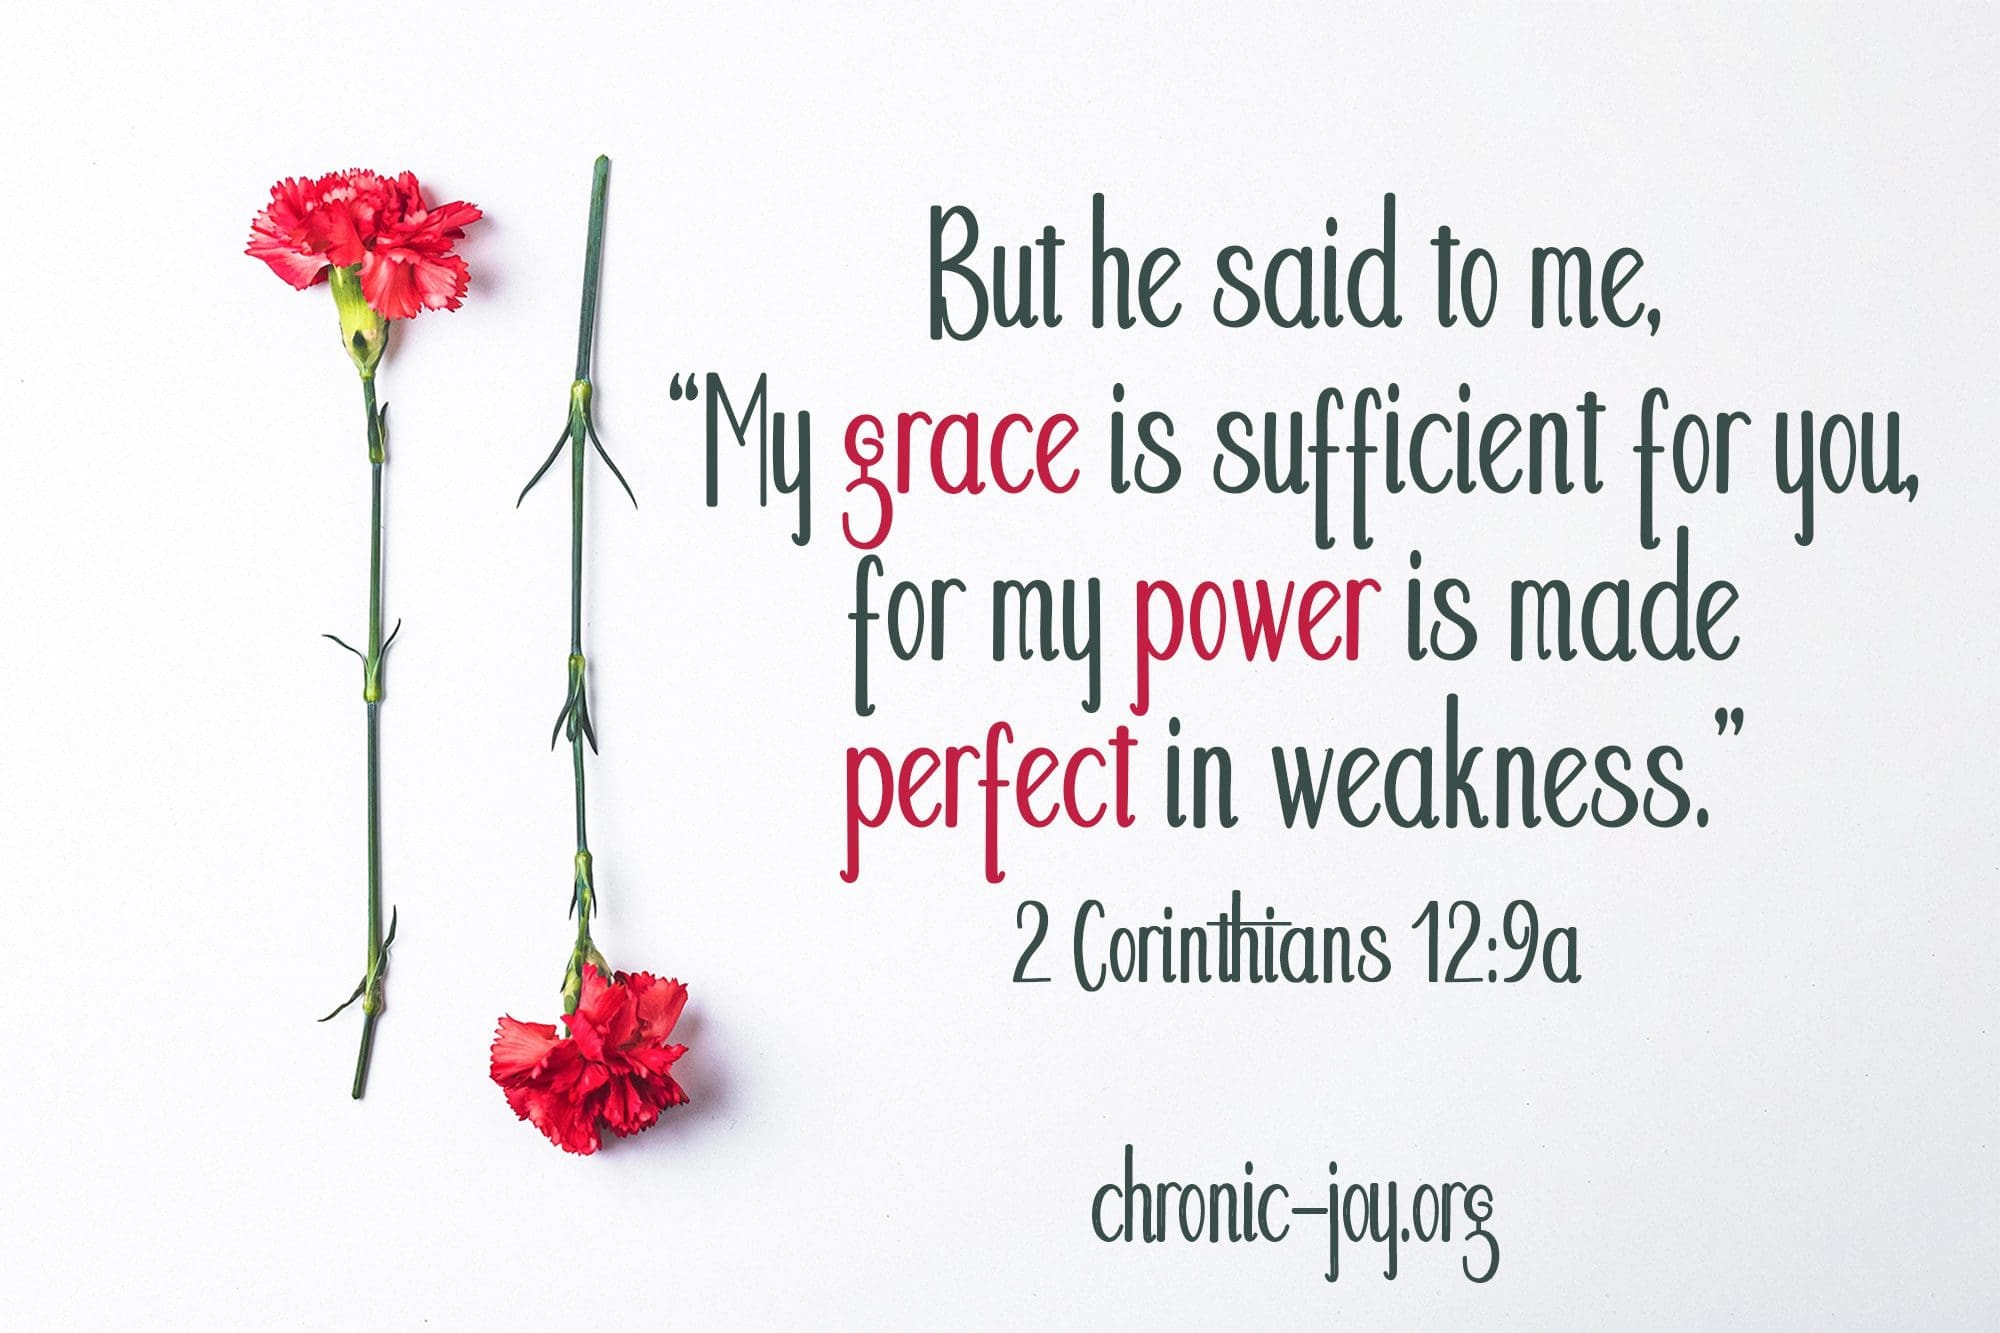 "But he said to me, 'My grace is sufficient for you, for my power is made perfect in weakness.'” 2 Corinthians 12:9a